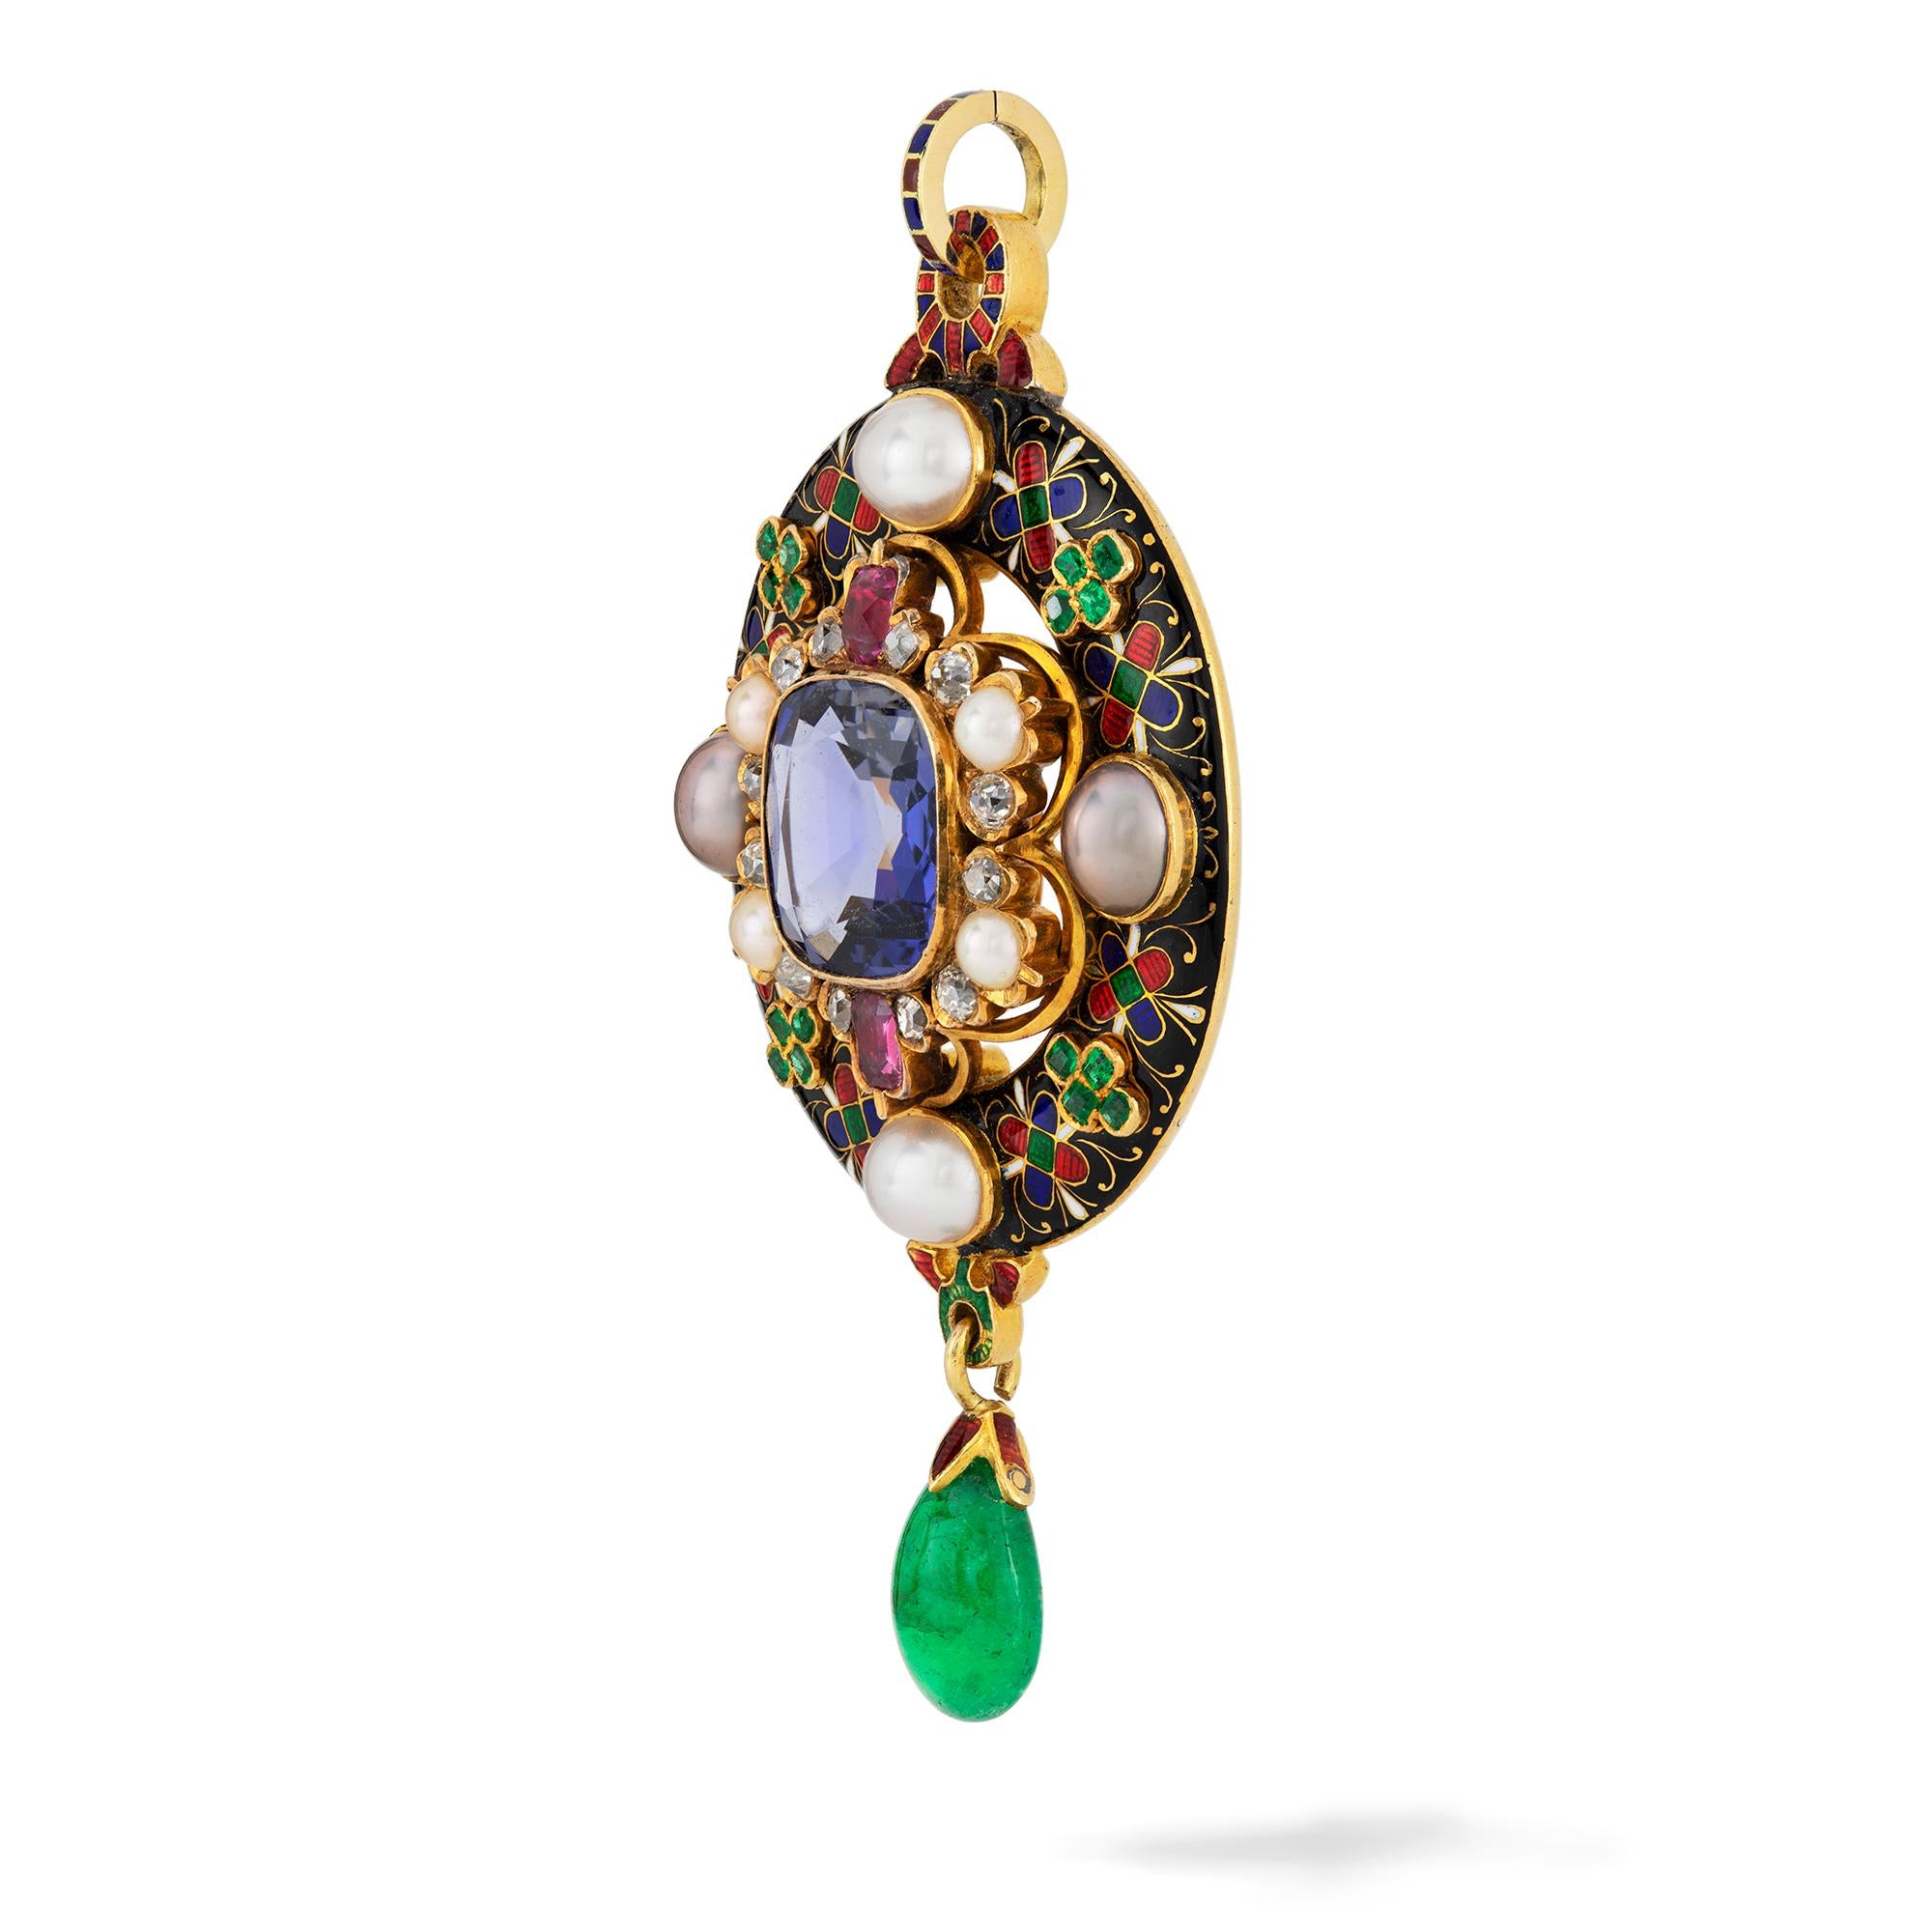 A Victorian Holbeinesque gold pendant, set to the centre with a cushion-shaped iolite measuring approximately 13x12mm within a border of two rubies, four pearls and old cushion-shaped diamonds, the frame decorated with polychrome enamel features and